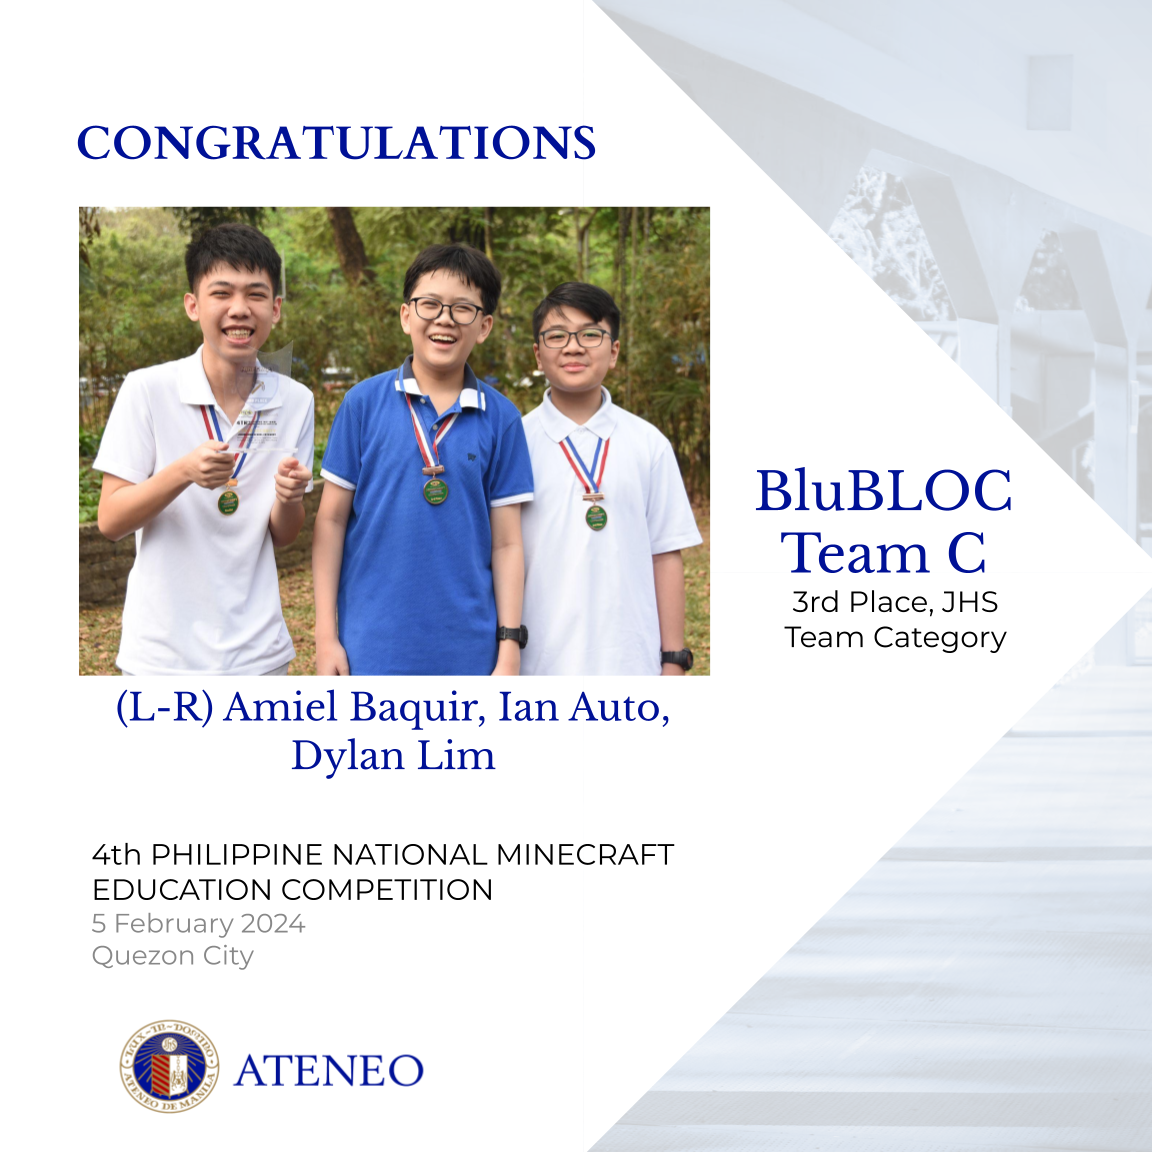 BluBLOC Team C placed 3rd in the team category